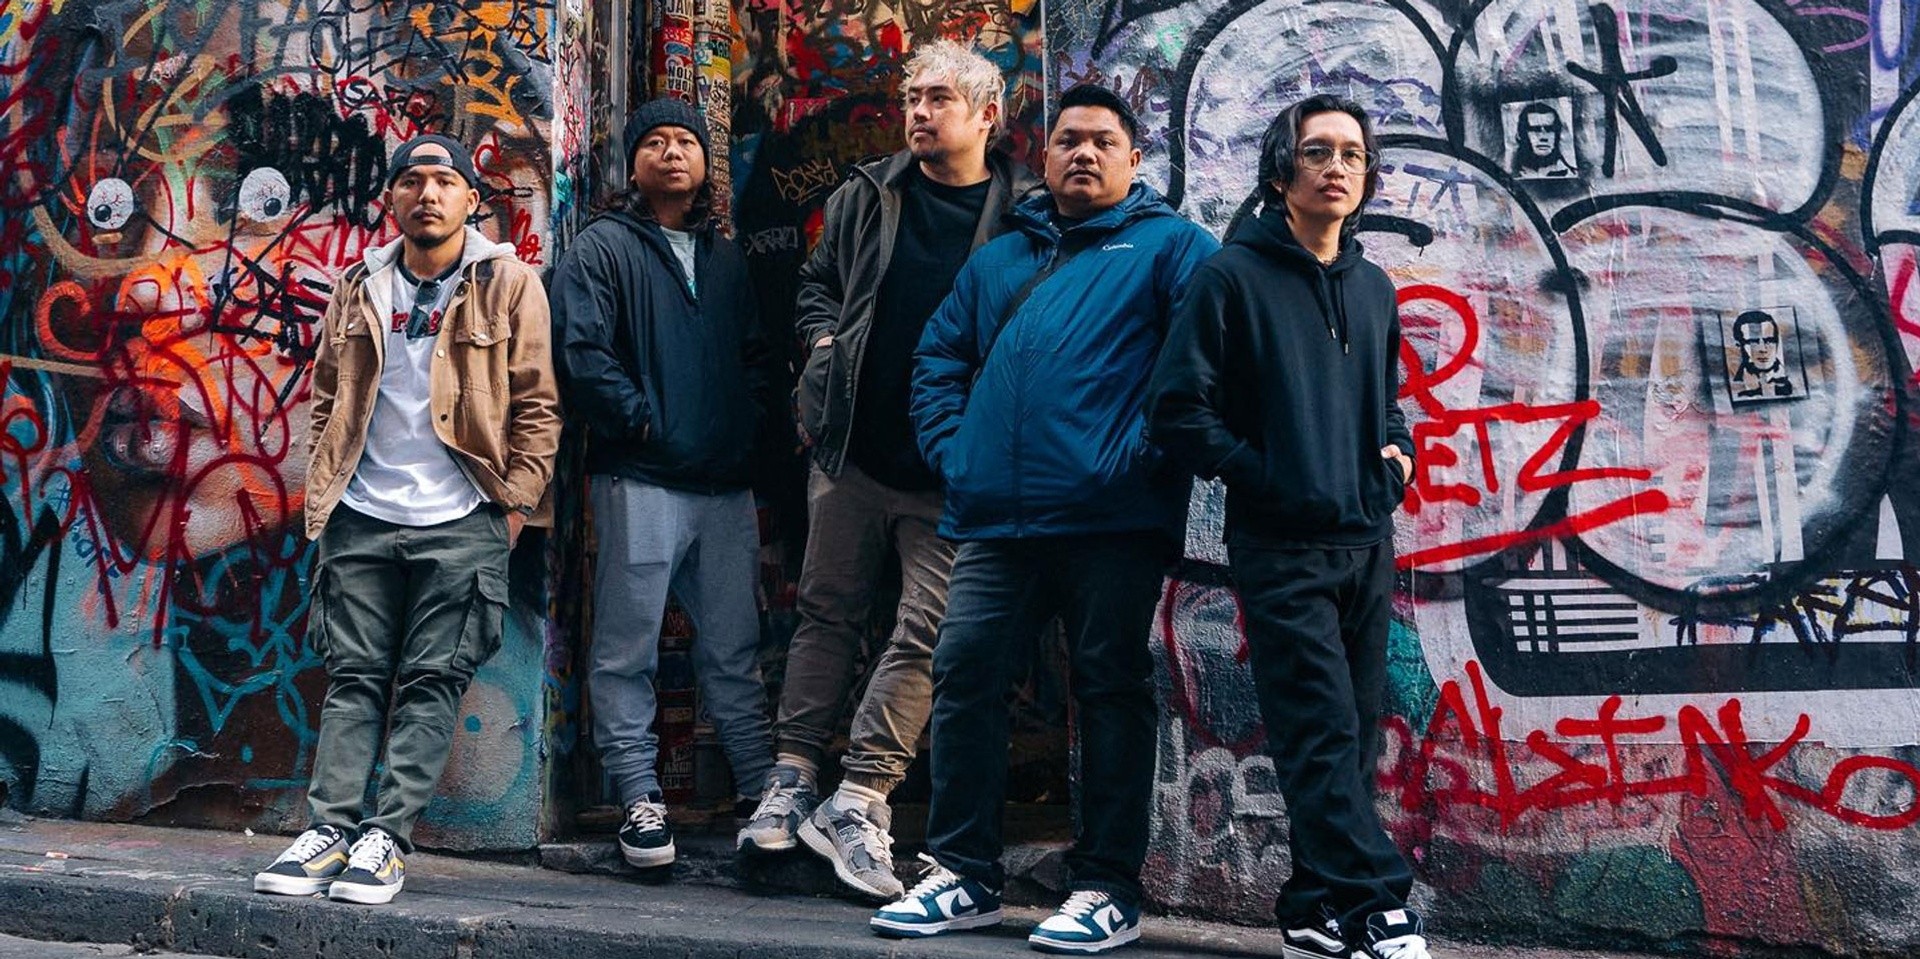 Here's what to expect at December Avenue’s 15th anniversary concert this February: "It's a full-scale concert, different from the usual shows we do"